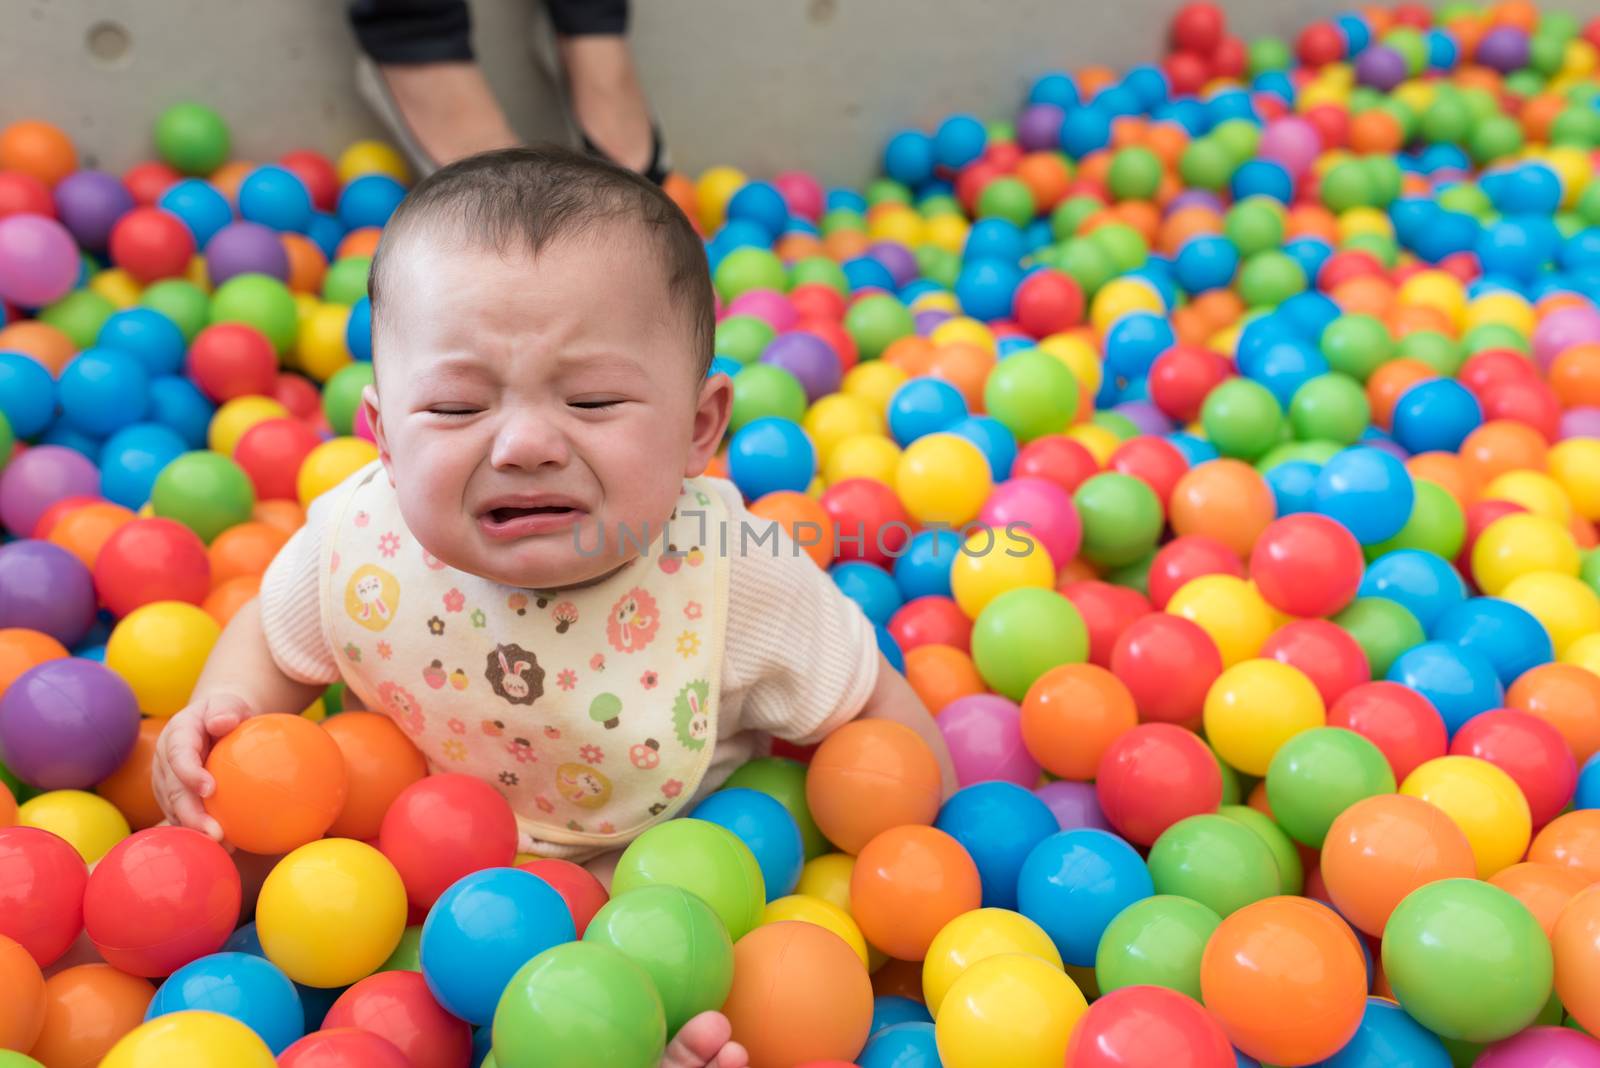 A cute crying girl sitting in a colorful ball pit at a playground.